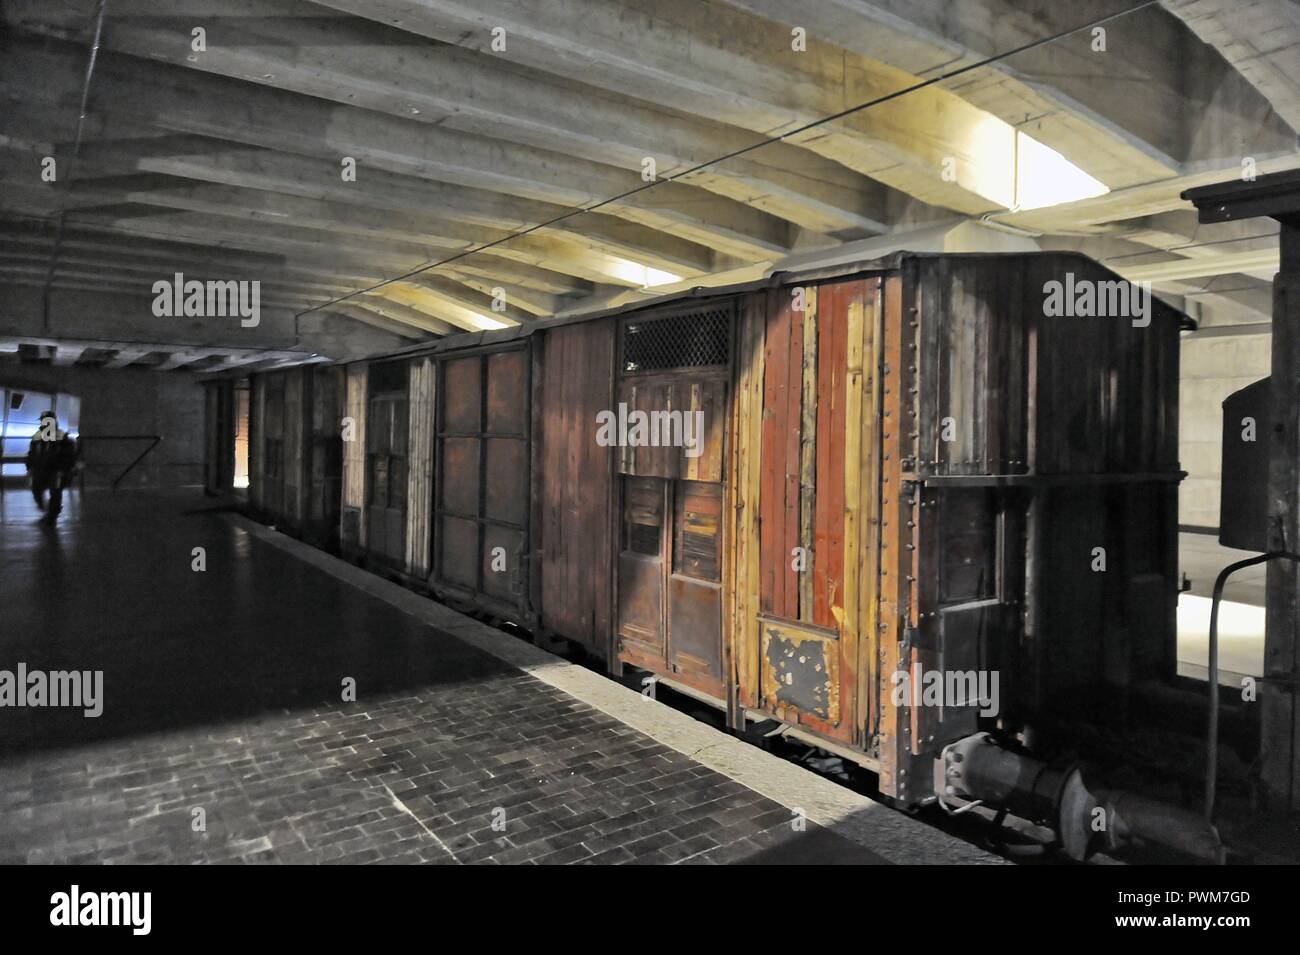 Milan (Italy), Memorial of the Shoah, at Track 21 in the basement of the Central Station, from where trains departed for the nazi concentration camps Stock Photo